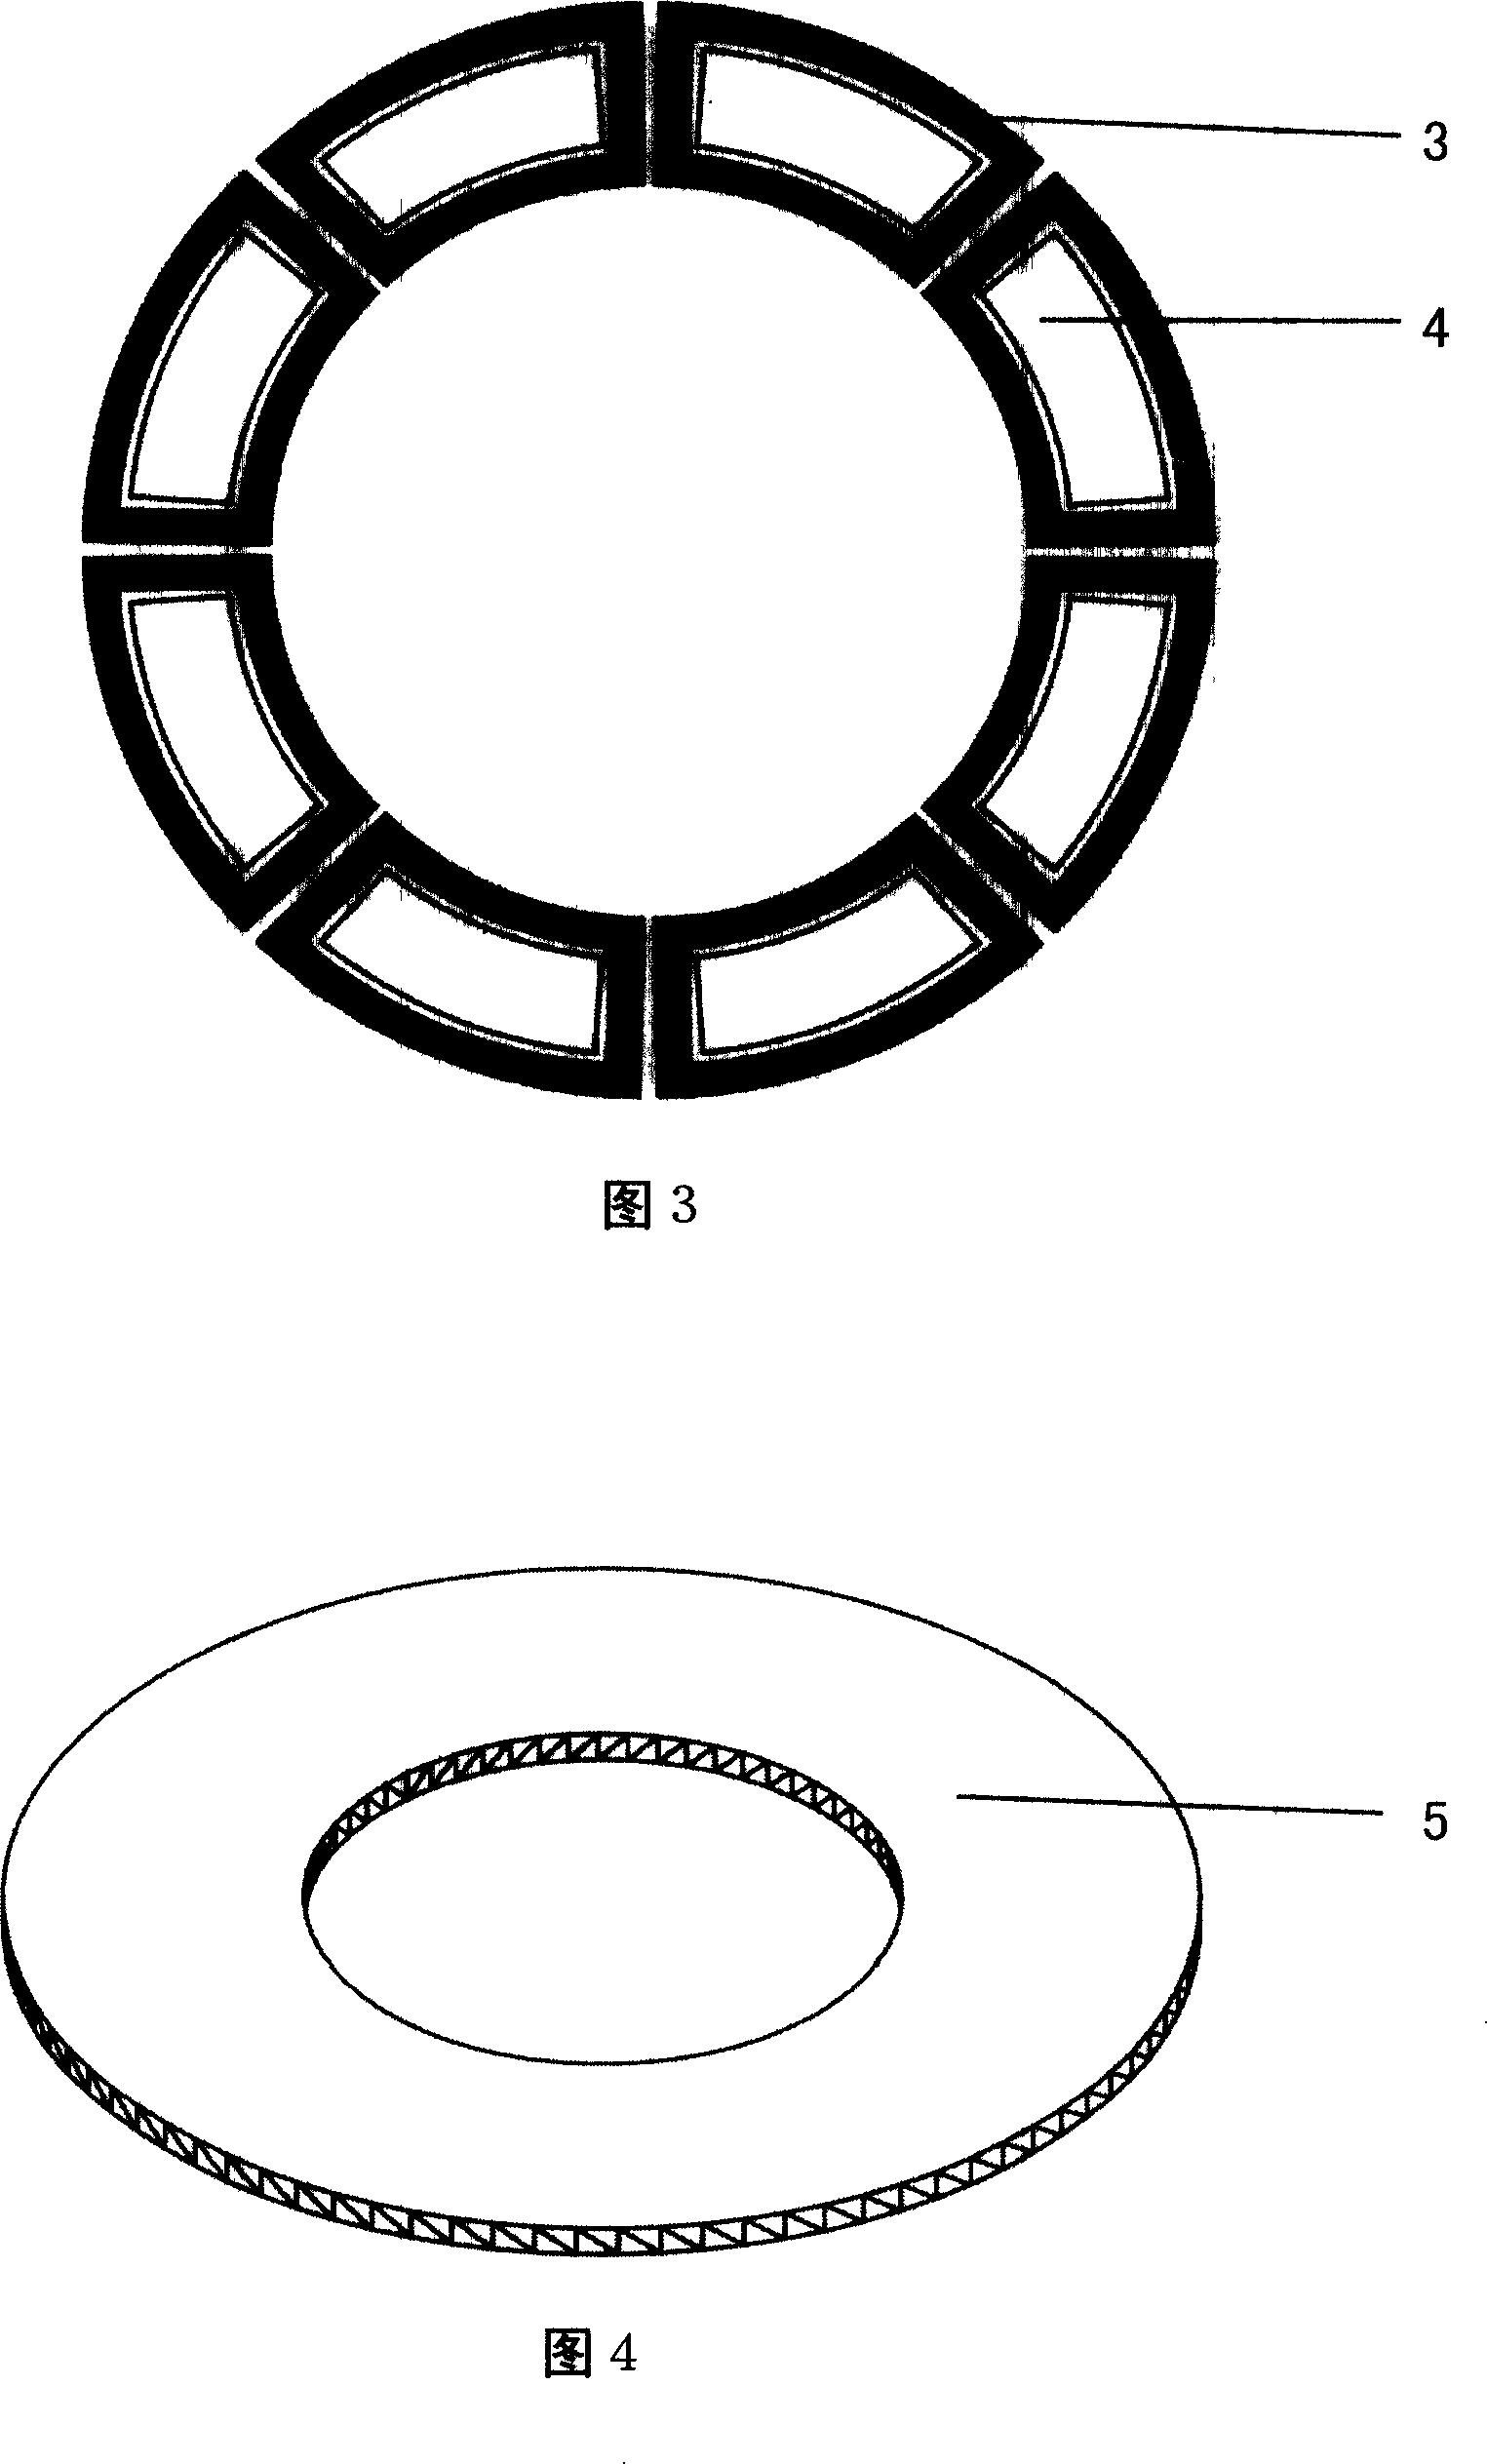 Internal stabilized electromagnetic suspension ring-shaped micro-rotating gyroscope